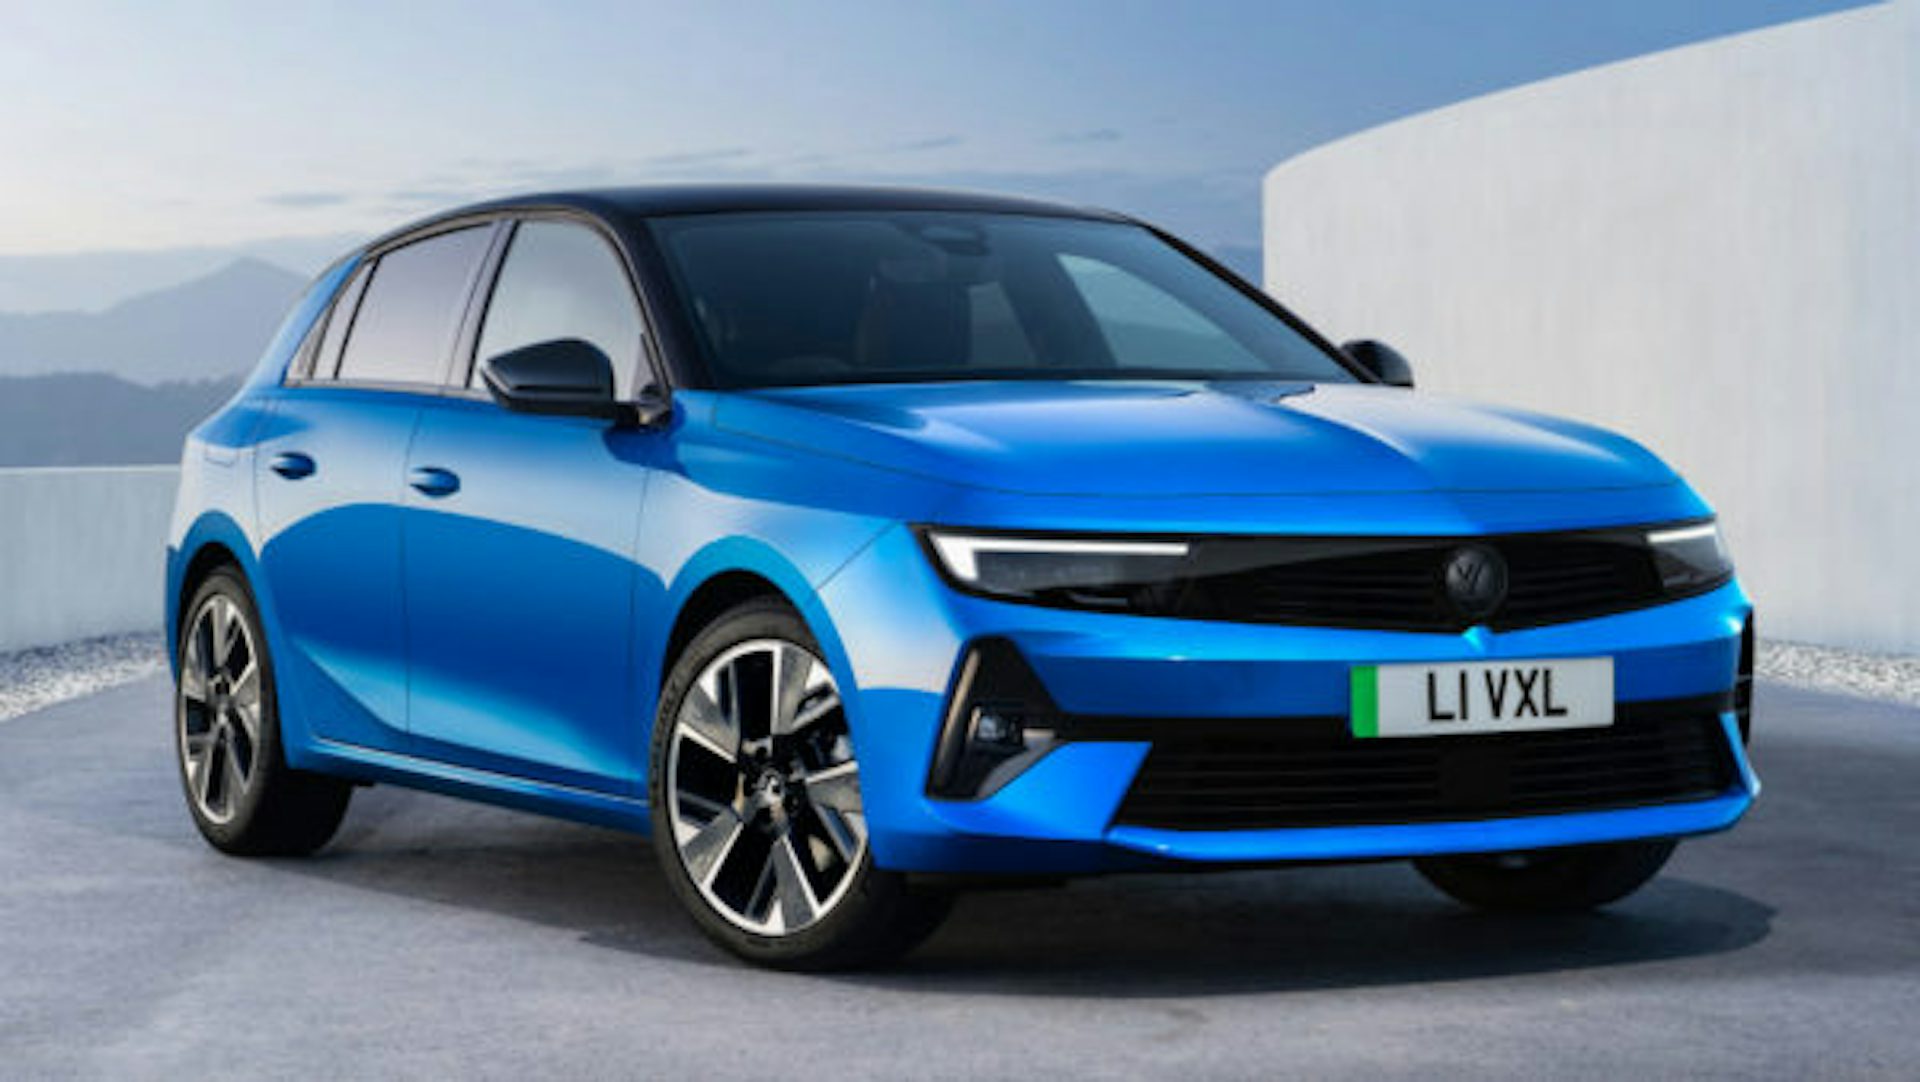 New Vauxhall Astra Electric revealed price, specs and release date